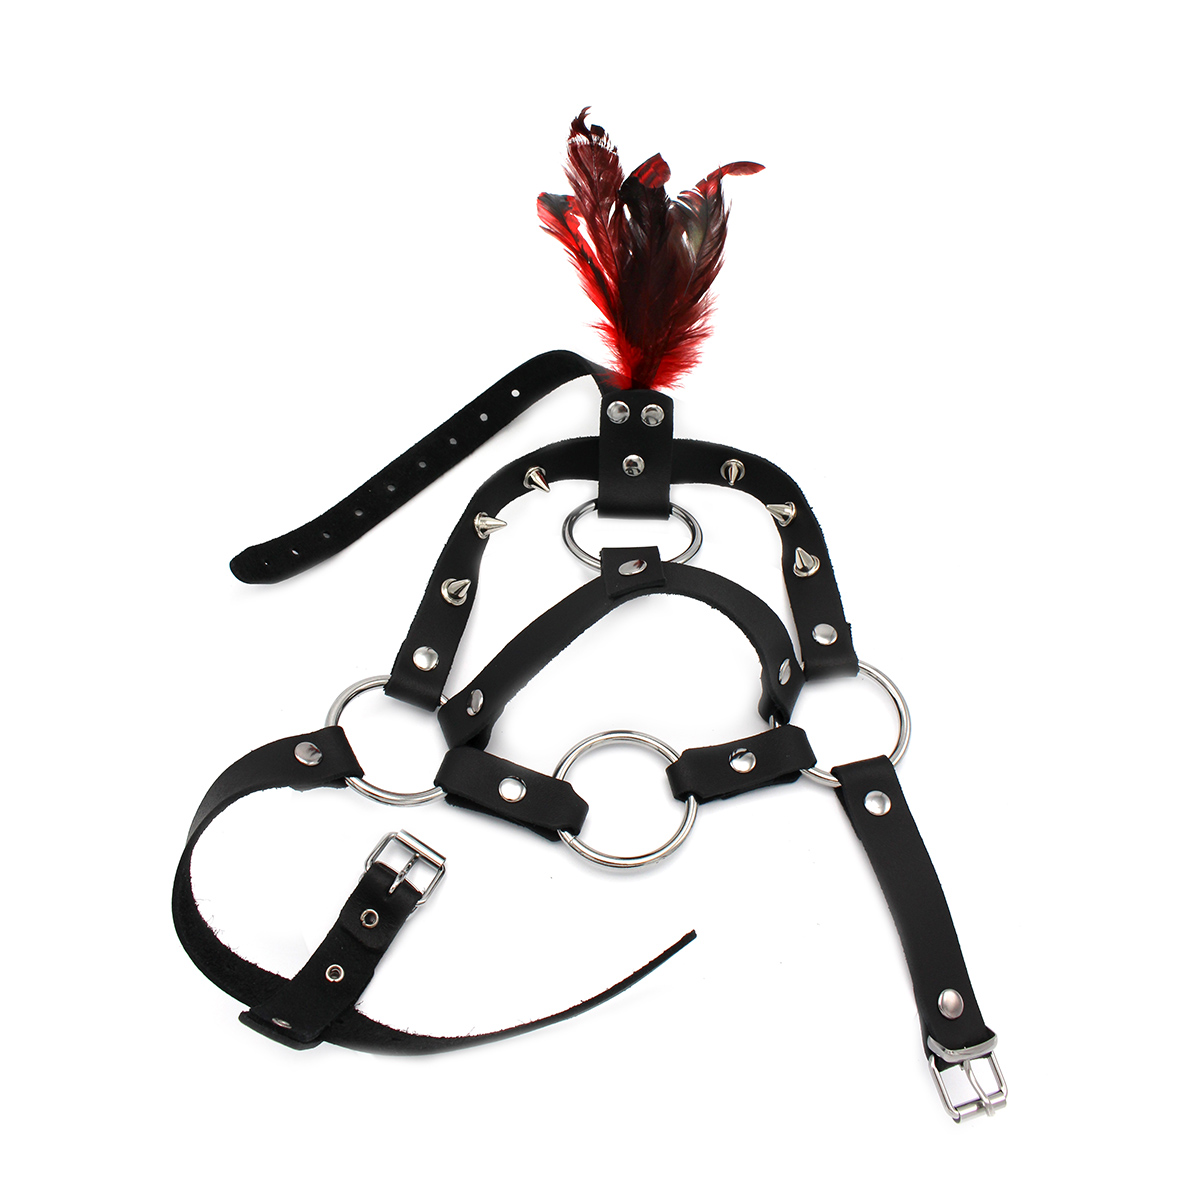 Leather-Head-Spiked-Harness-with-Feather-134-KIO-0295-1